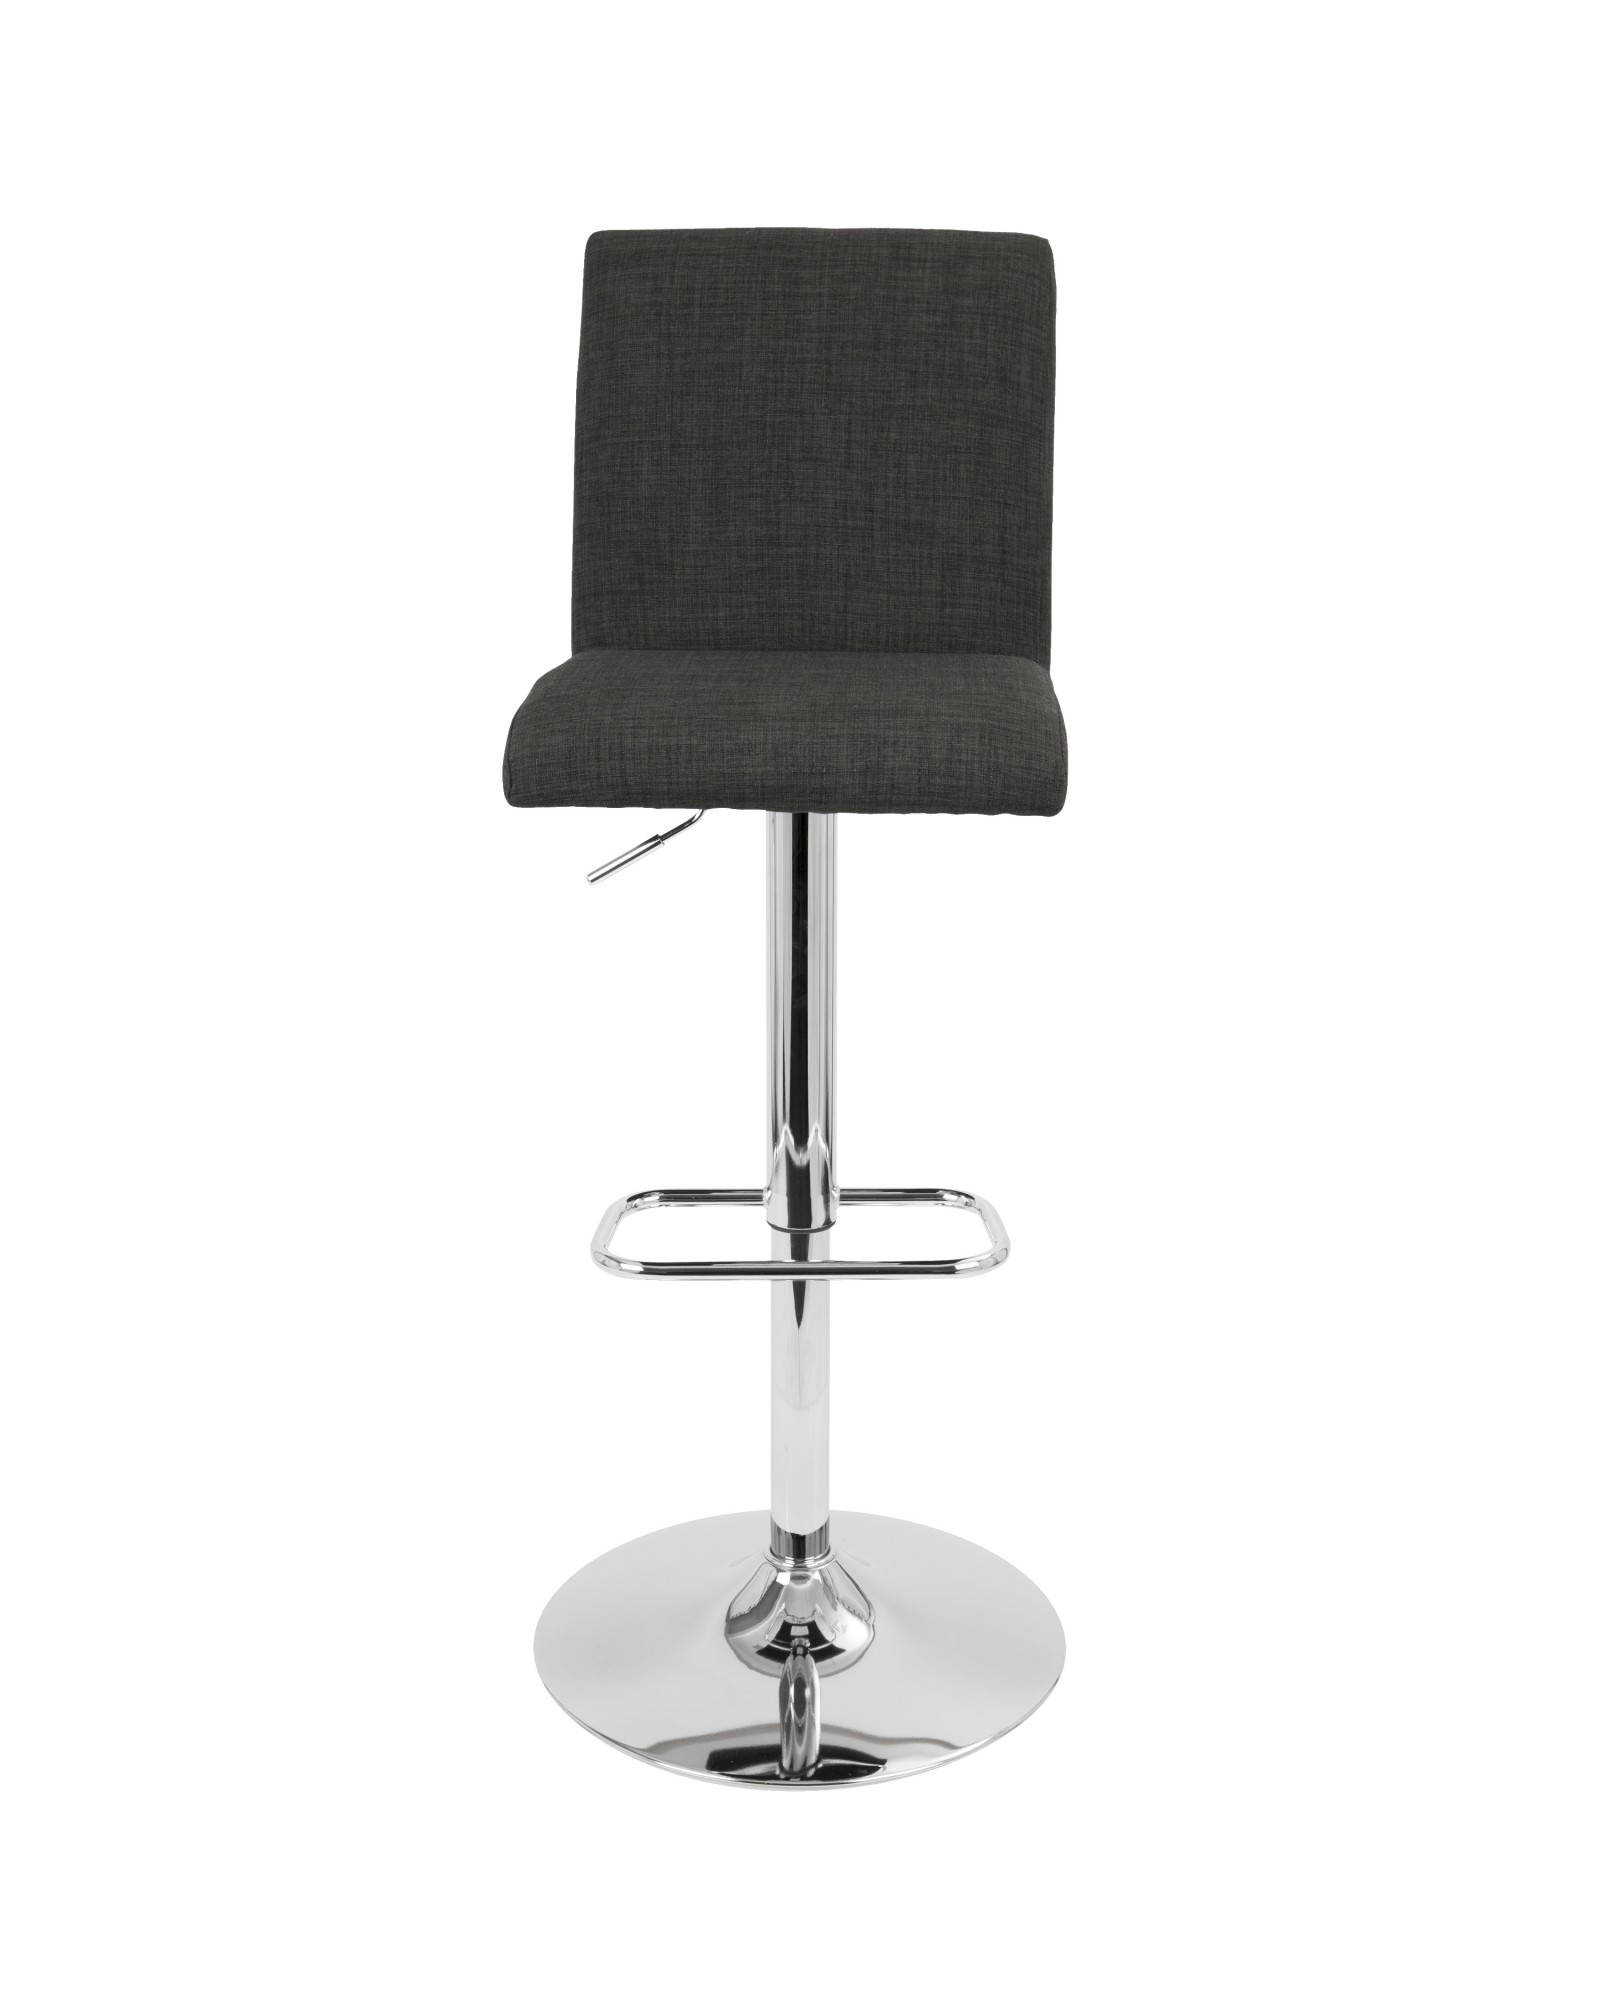 Tintori Contemporary Adjustable Barstool with Swivel in Charcoal